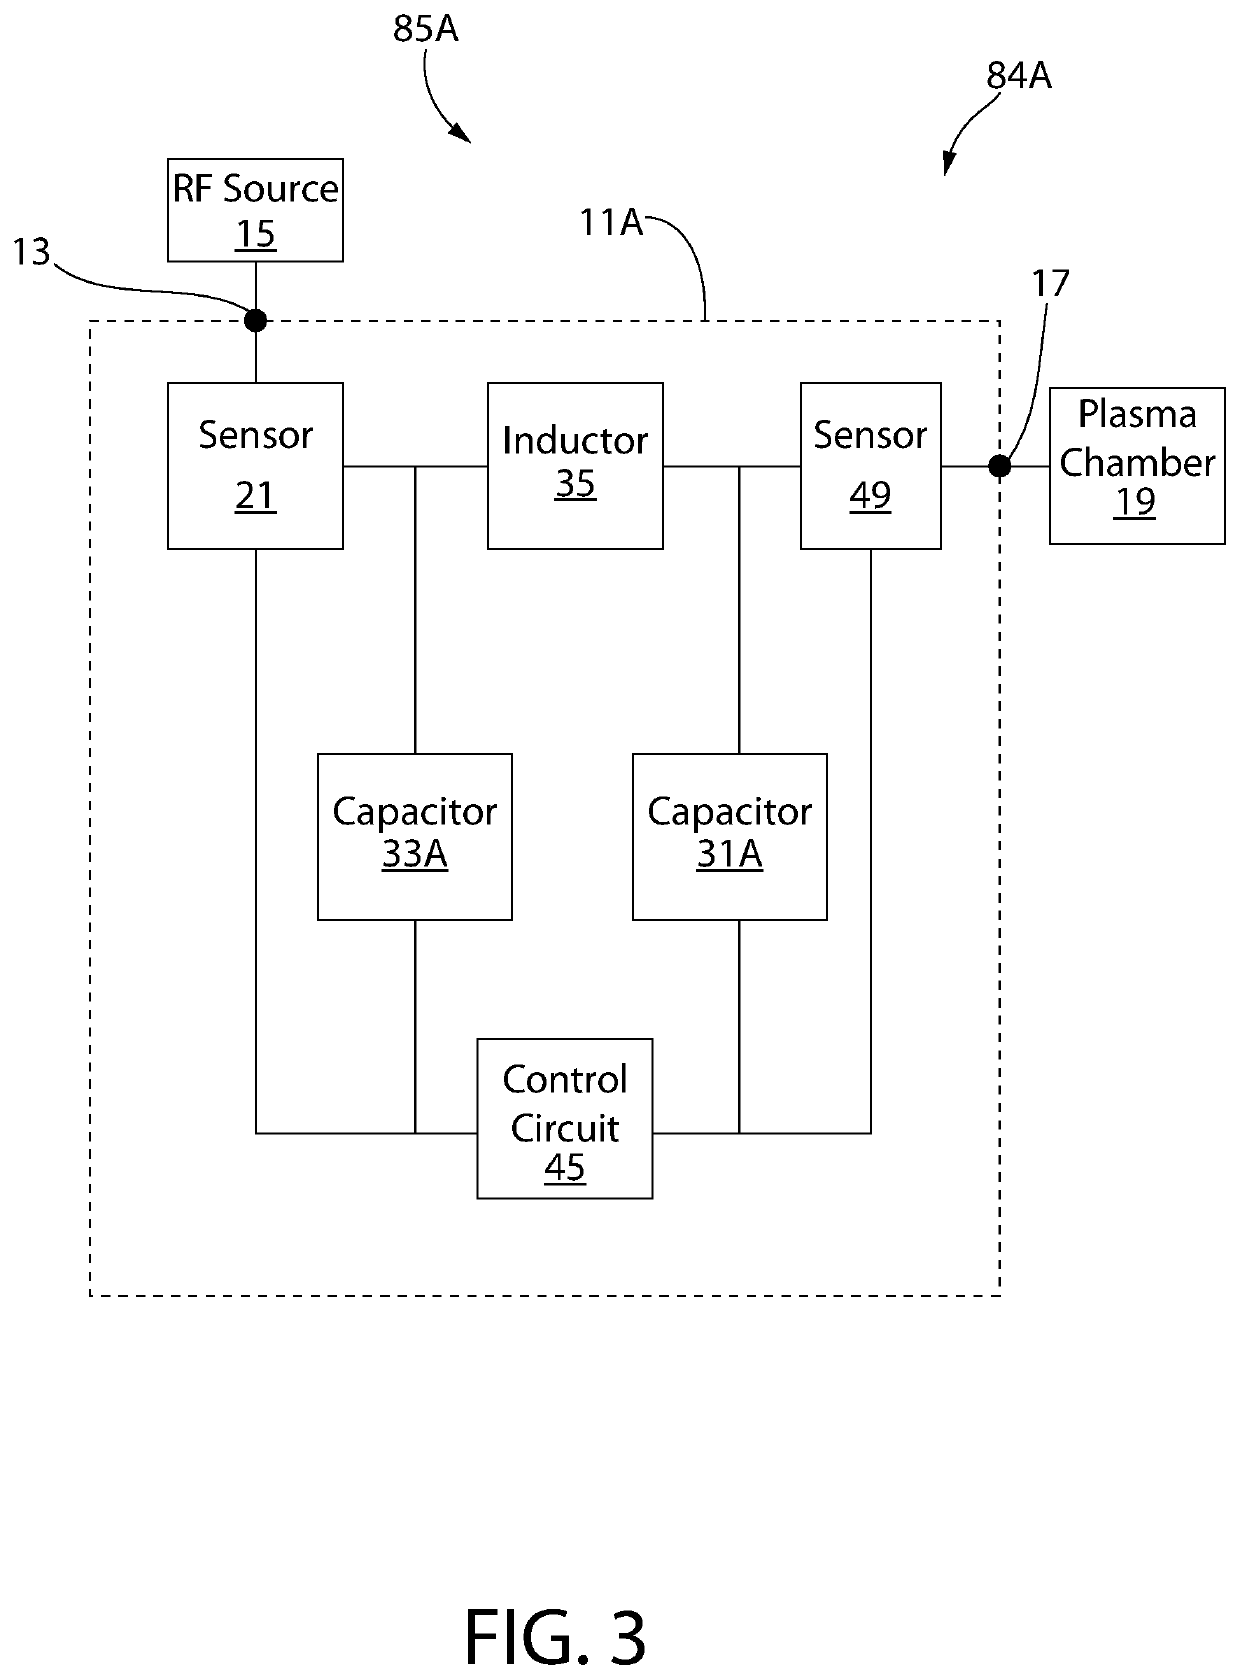 Restricted capacitor switching